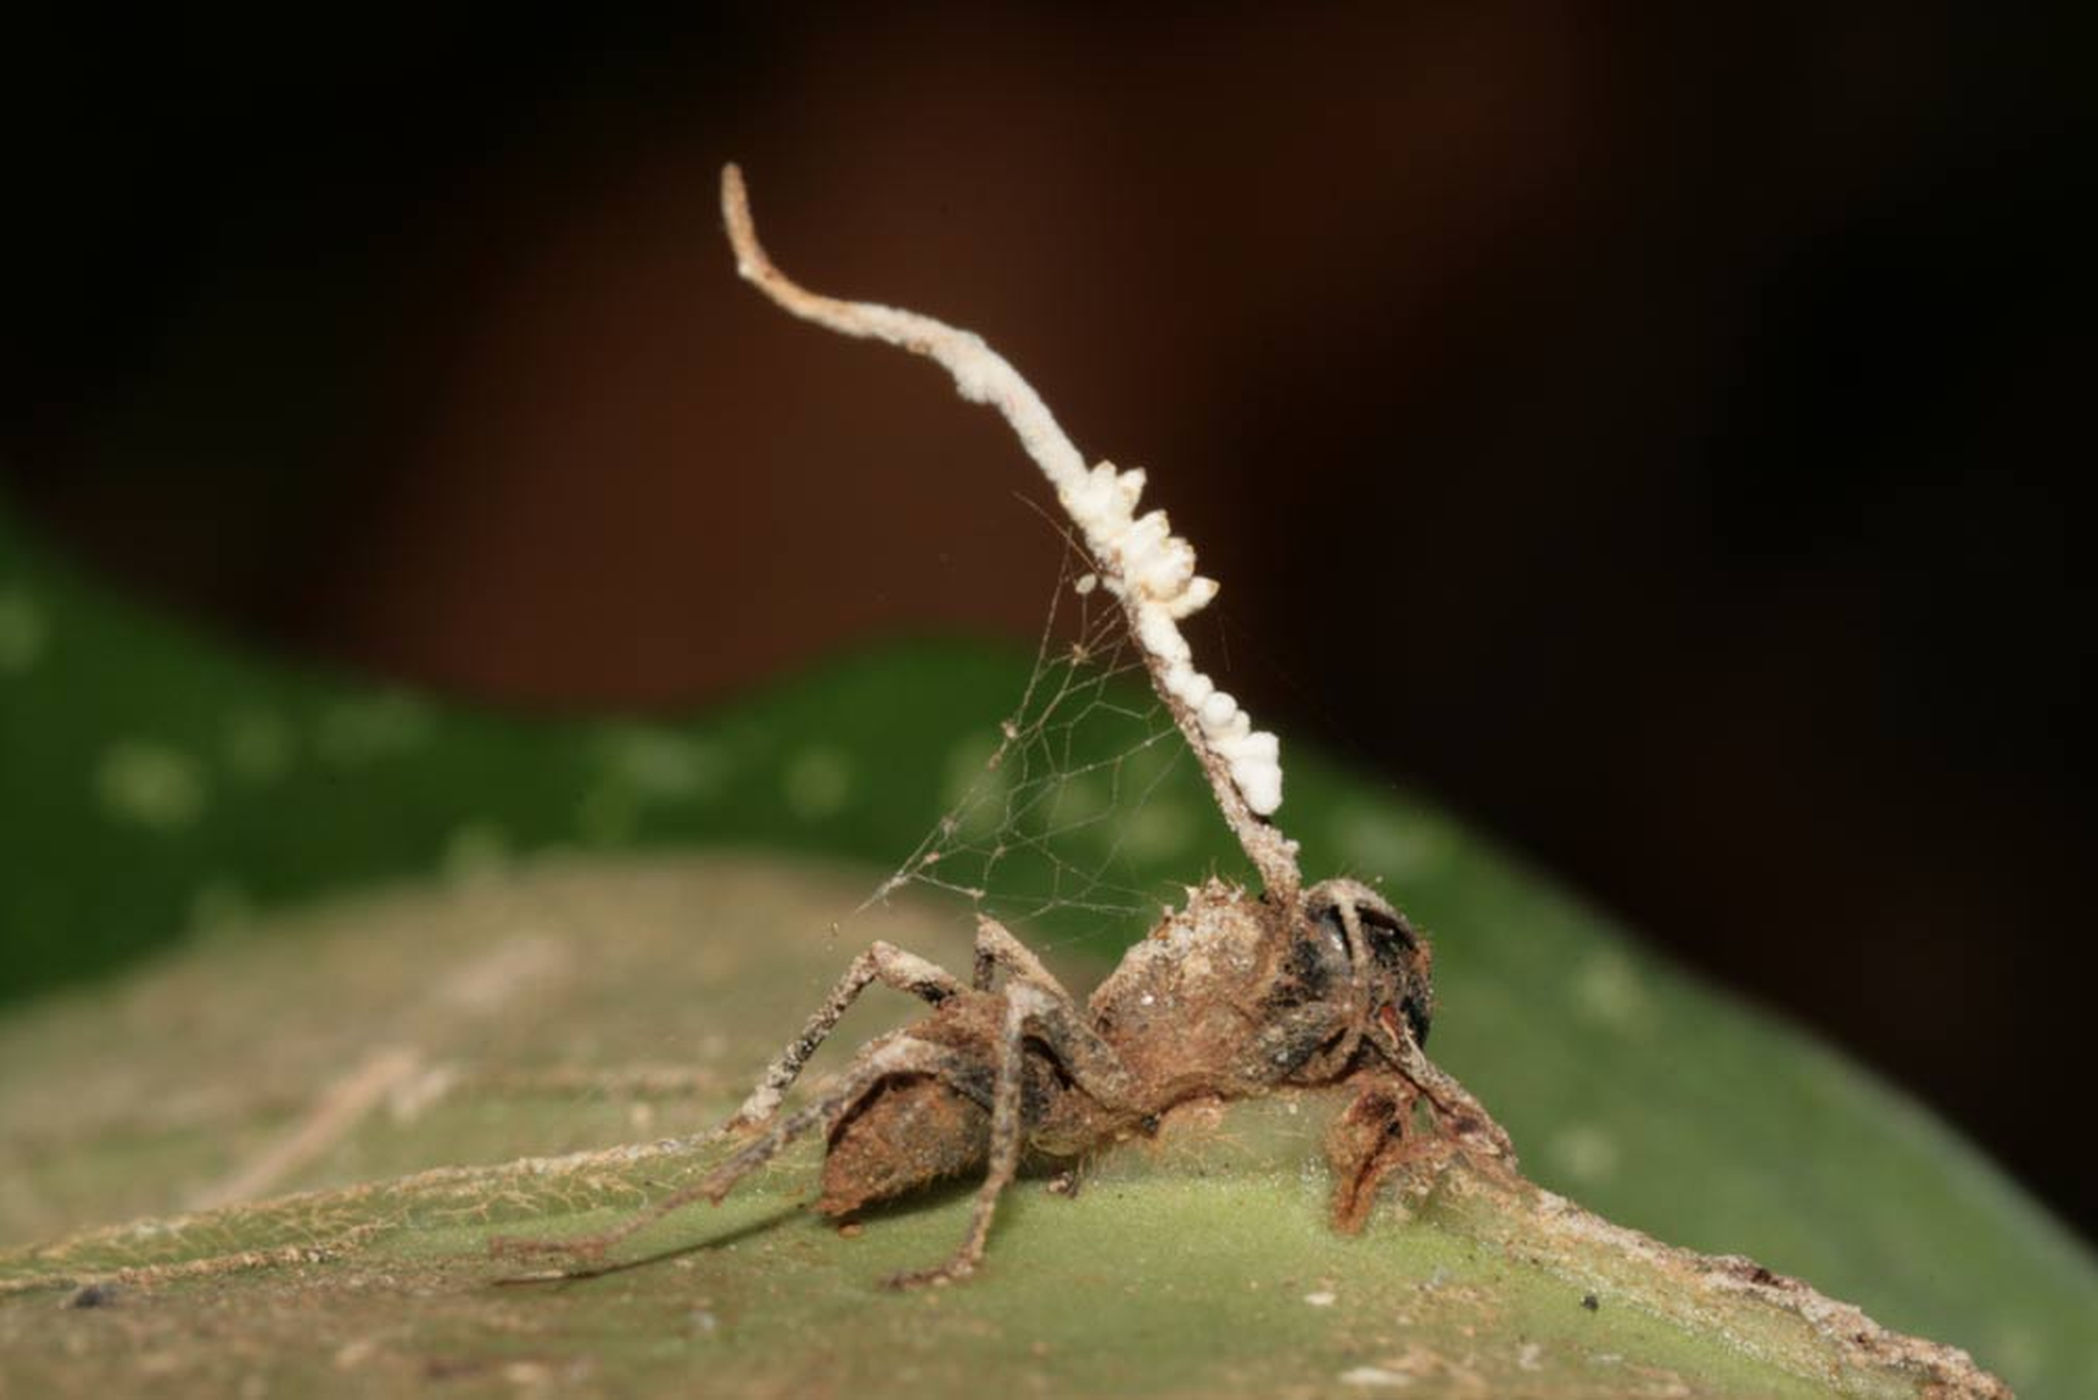 Gruesome fungi turns ants into Zombies, forcing  them to do their bidding before killing them.